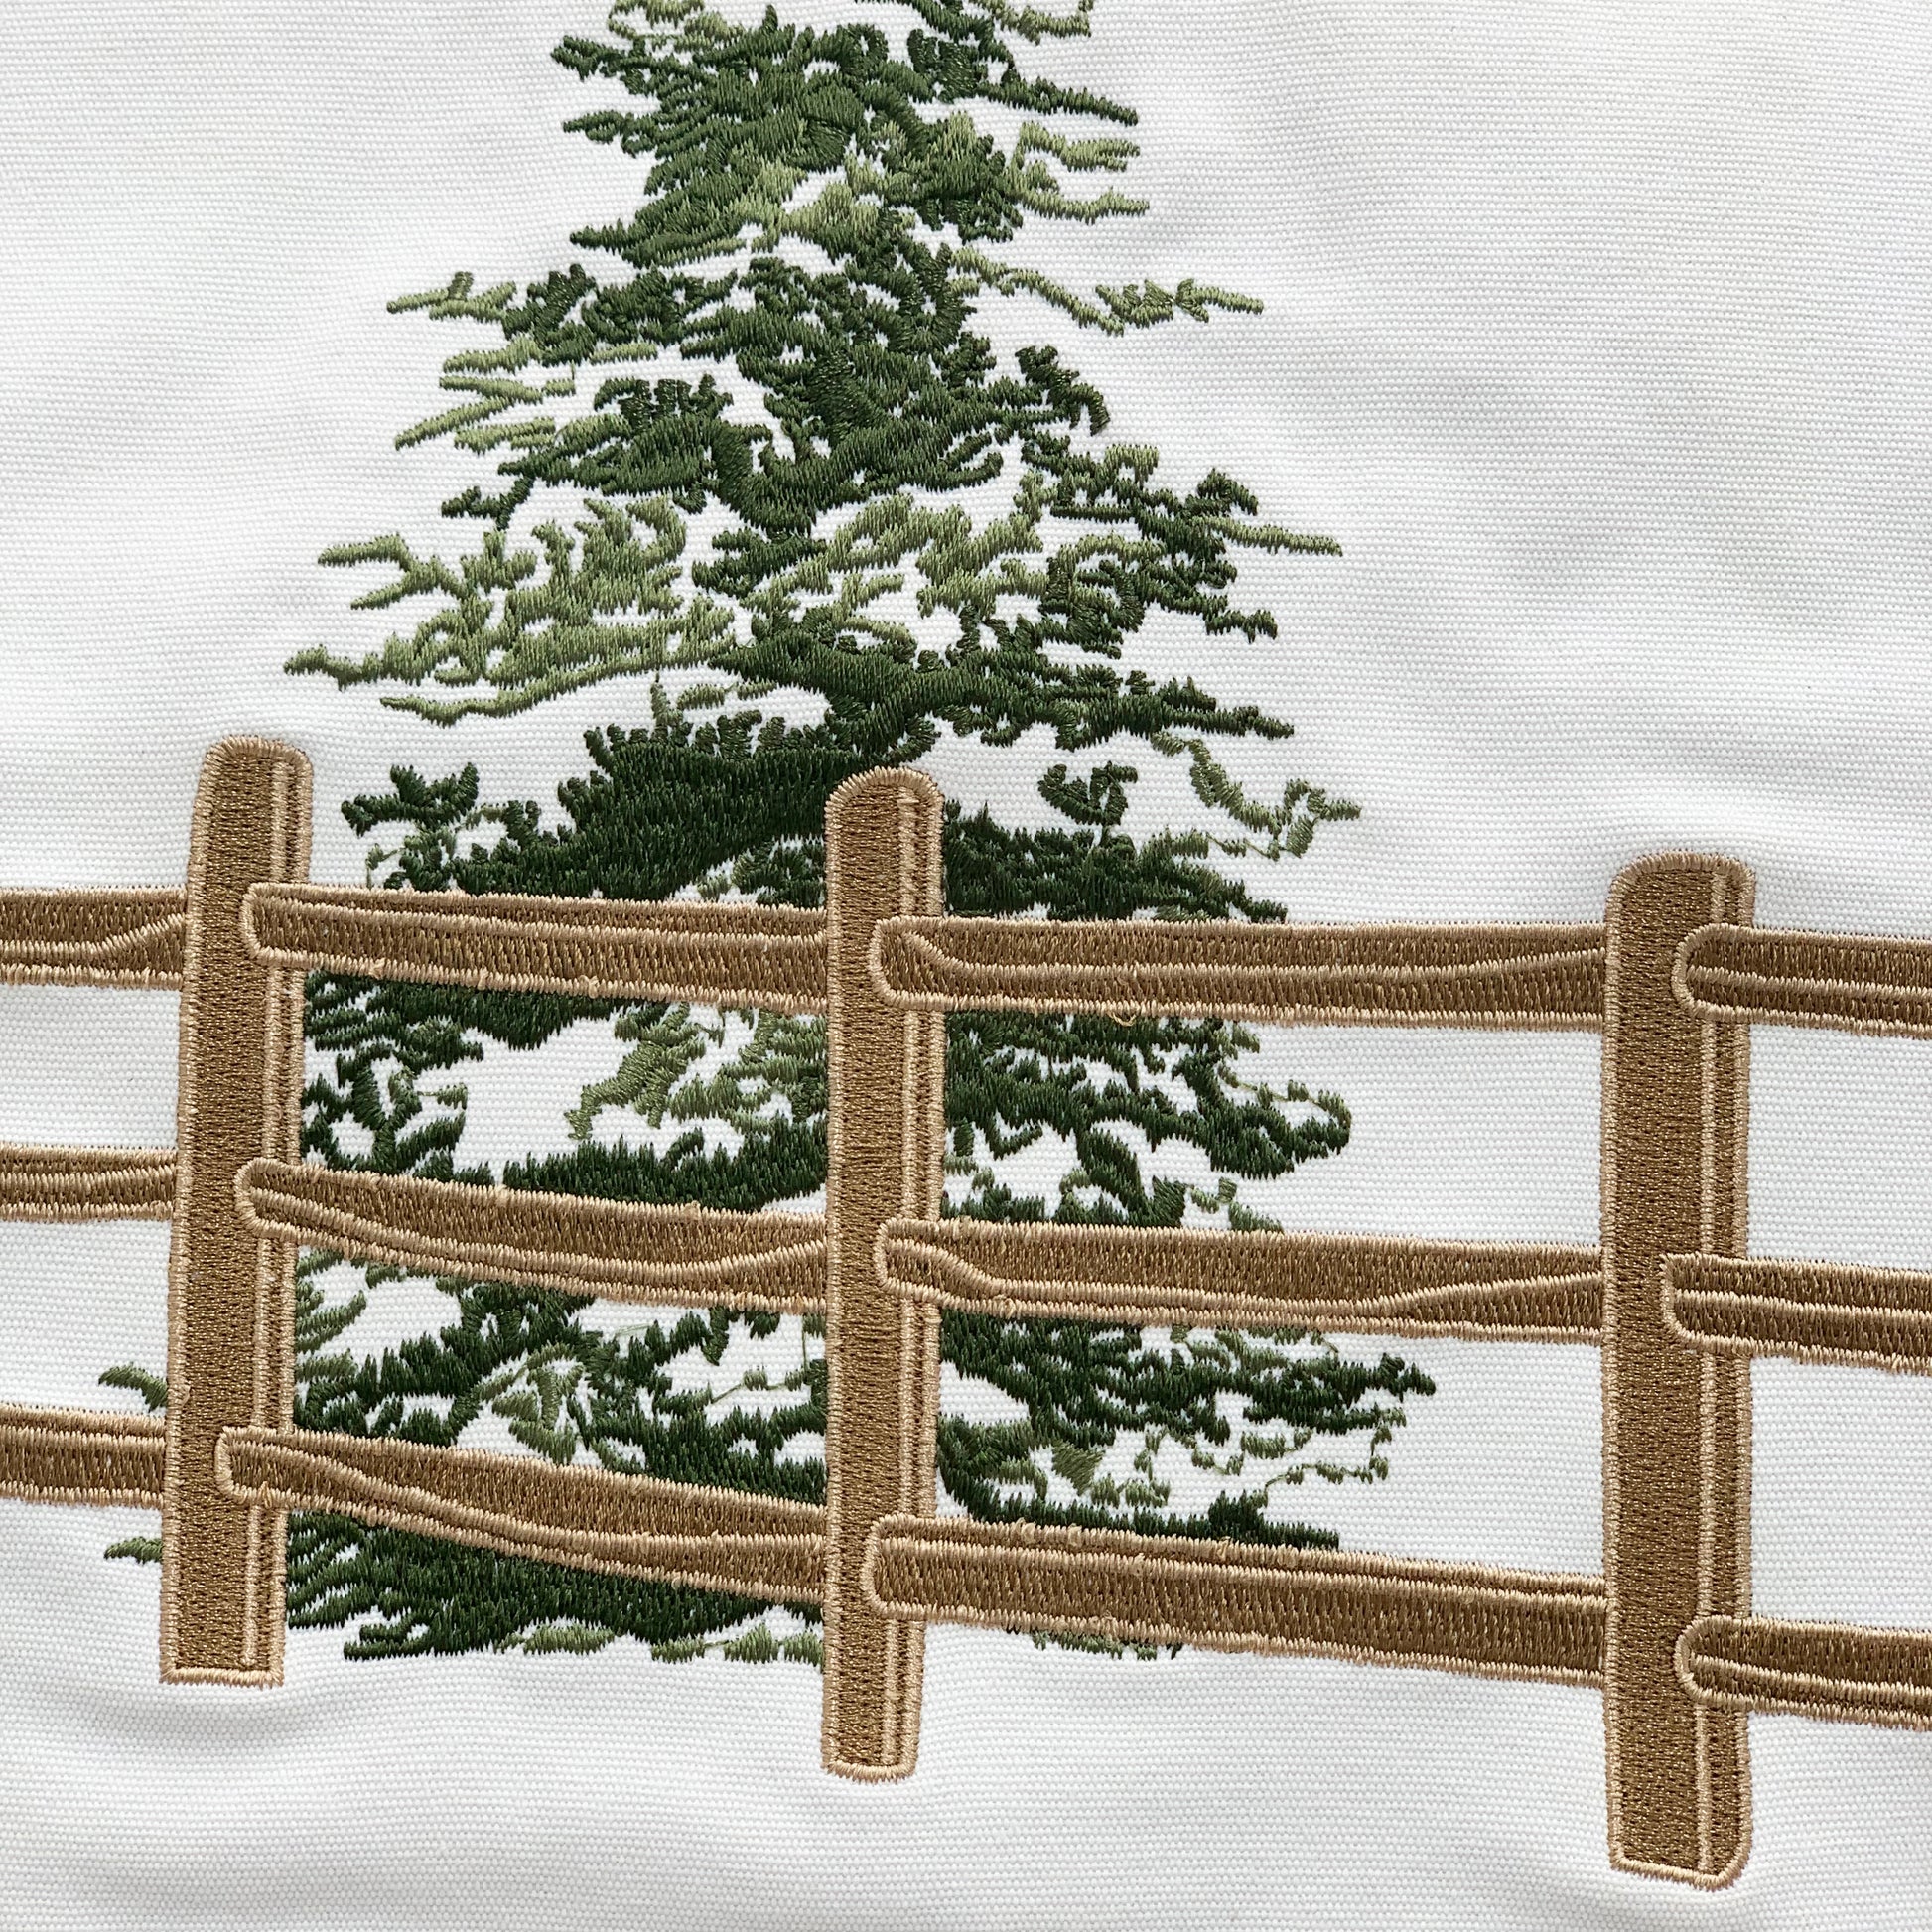 Detail shot of the fence & everygreens on the Winter Chill Neutral Indoor Outdoor pillow.